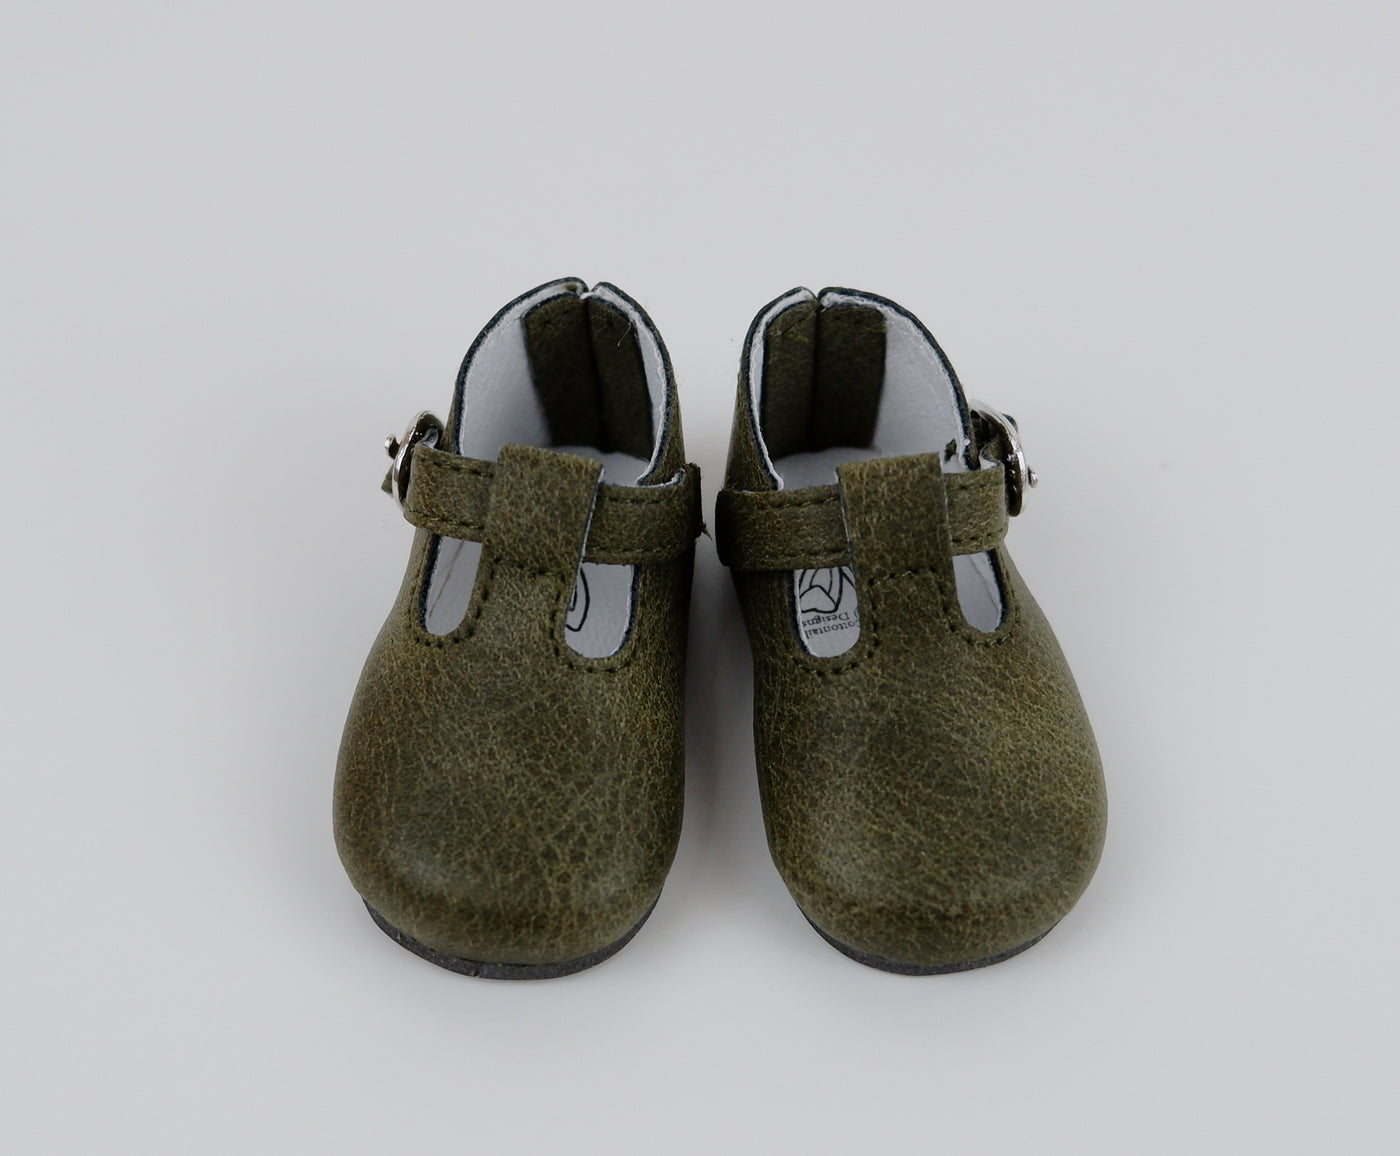 T-Strap Dress Shoes - Weathered Moss